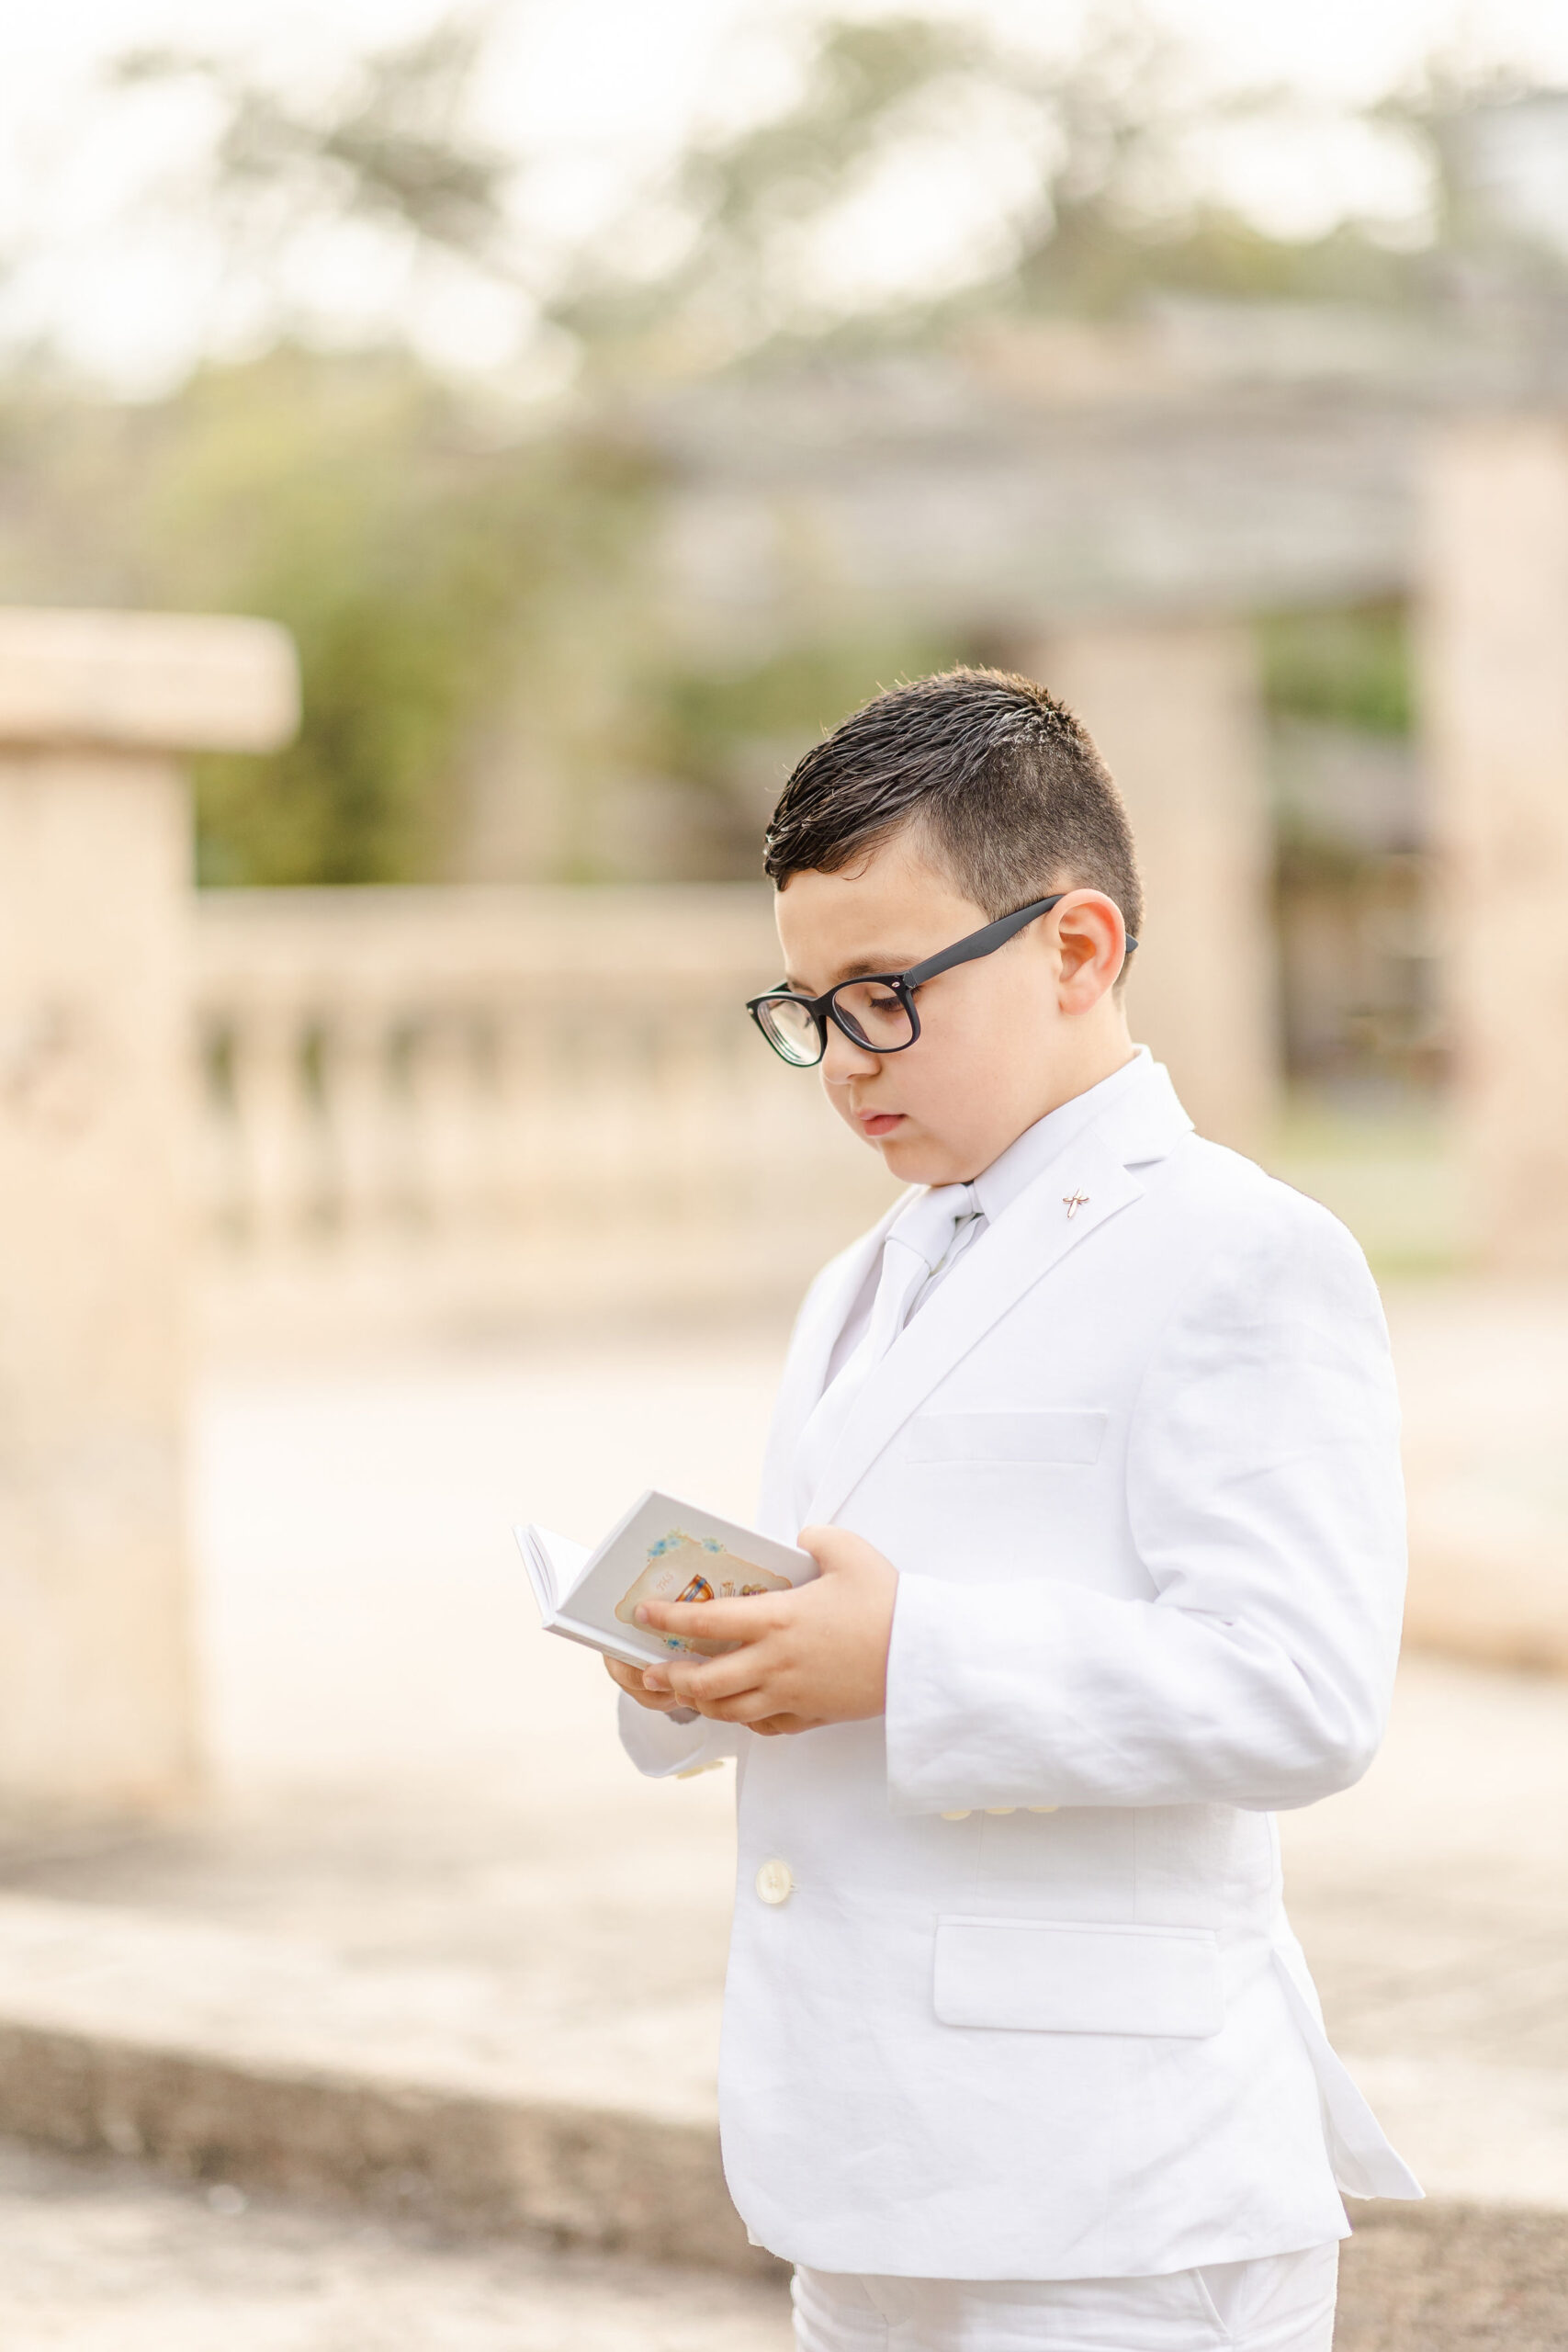 A boy wearing a white suit quietly reads his first communion prayer book on a stone path first communion stores in miami